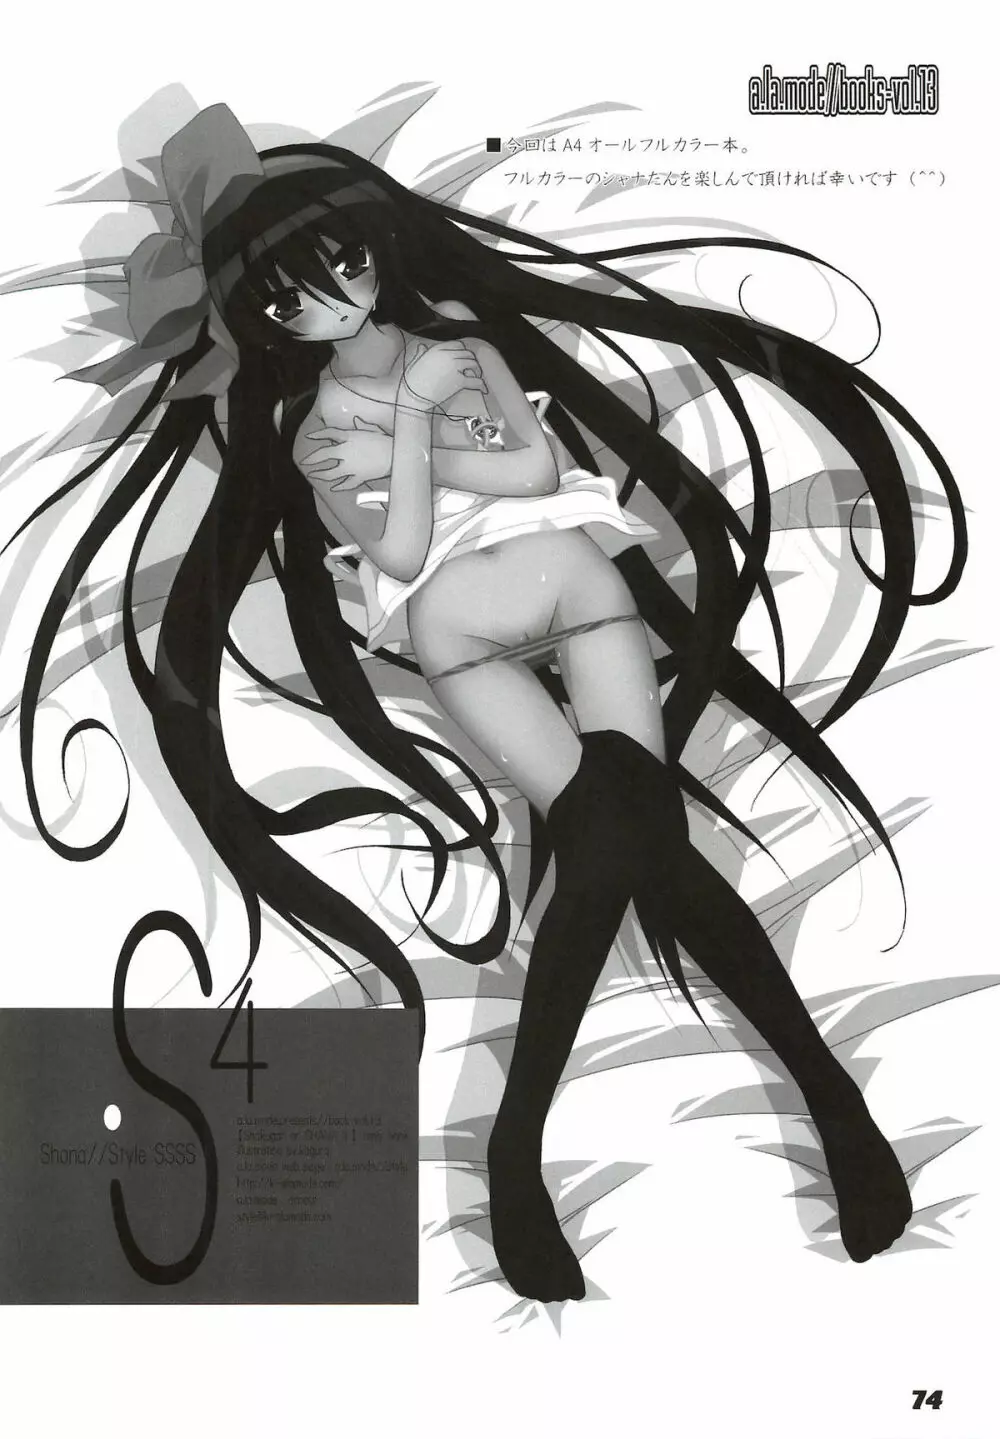 La Collection -Shana／／Style- Page.74